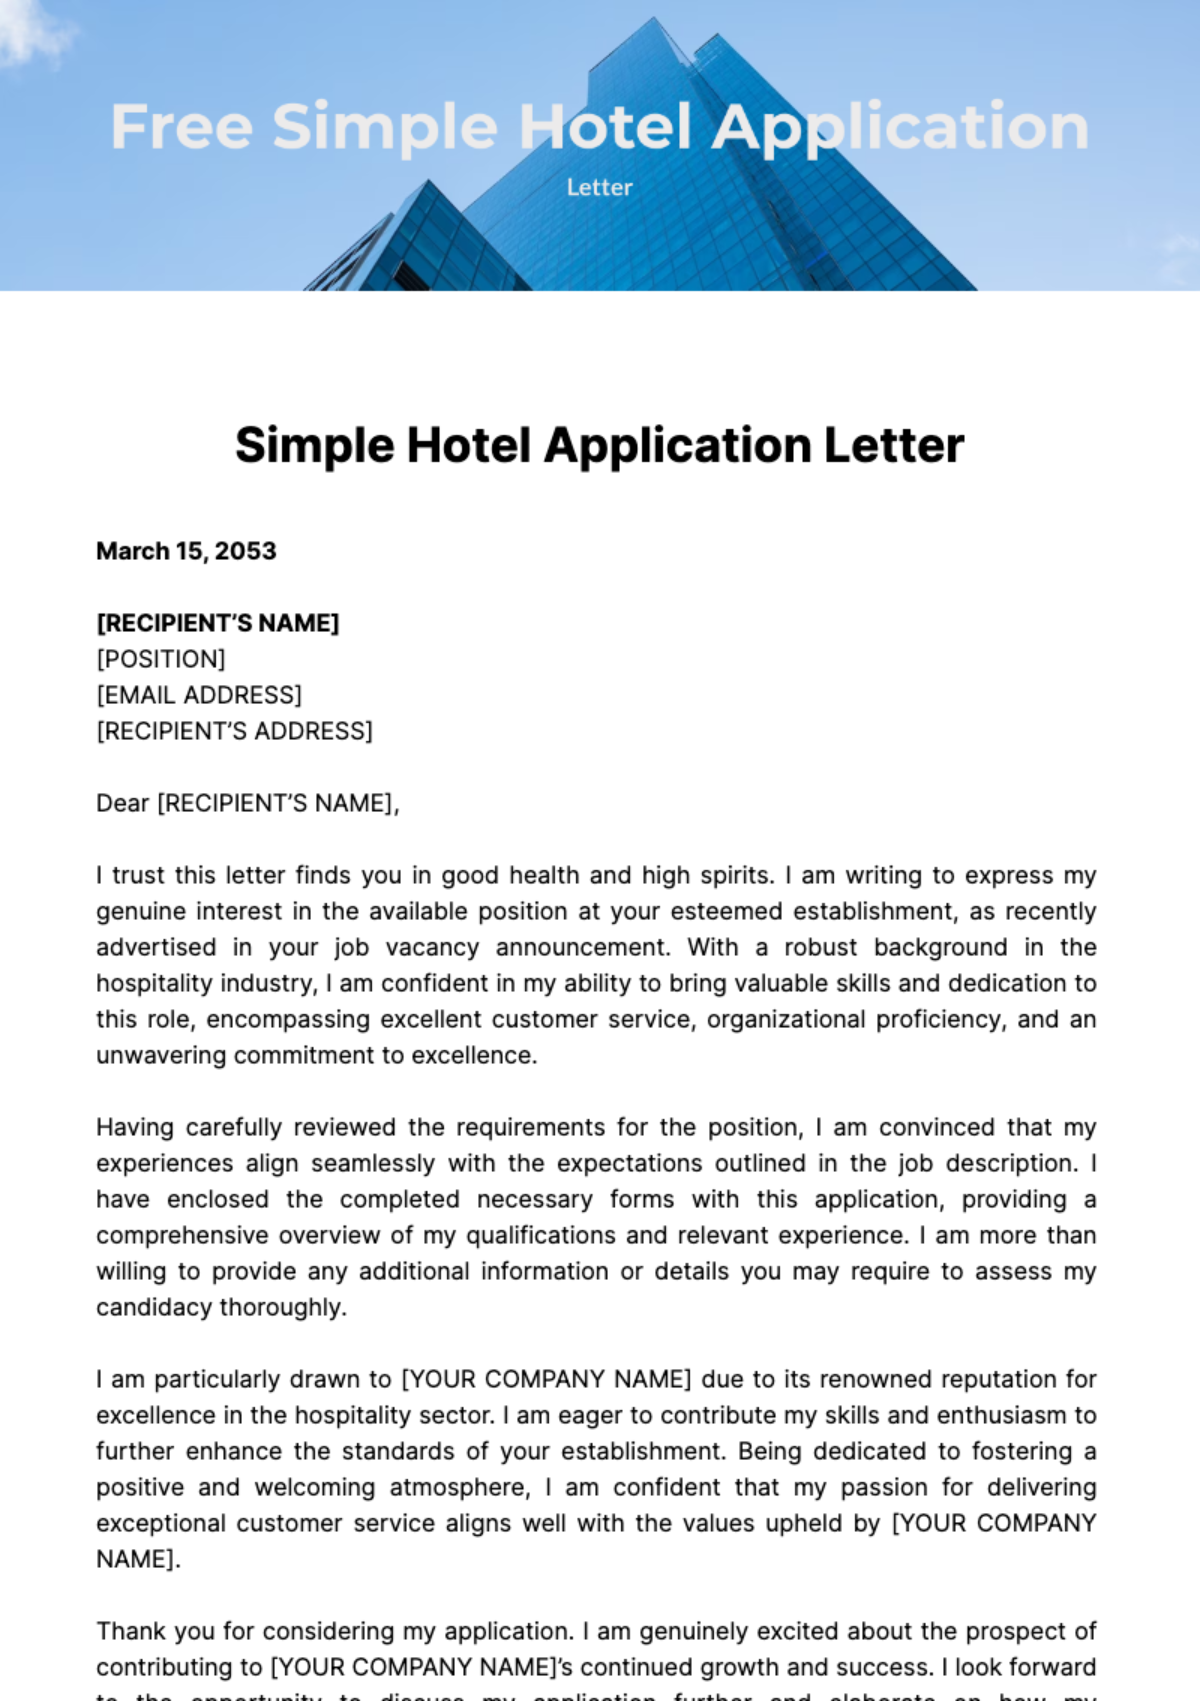 Simple Hotel Application Letter Template